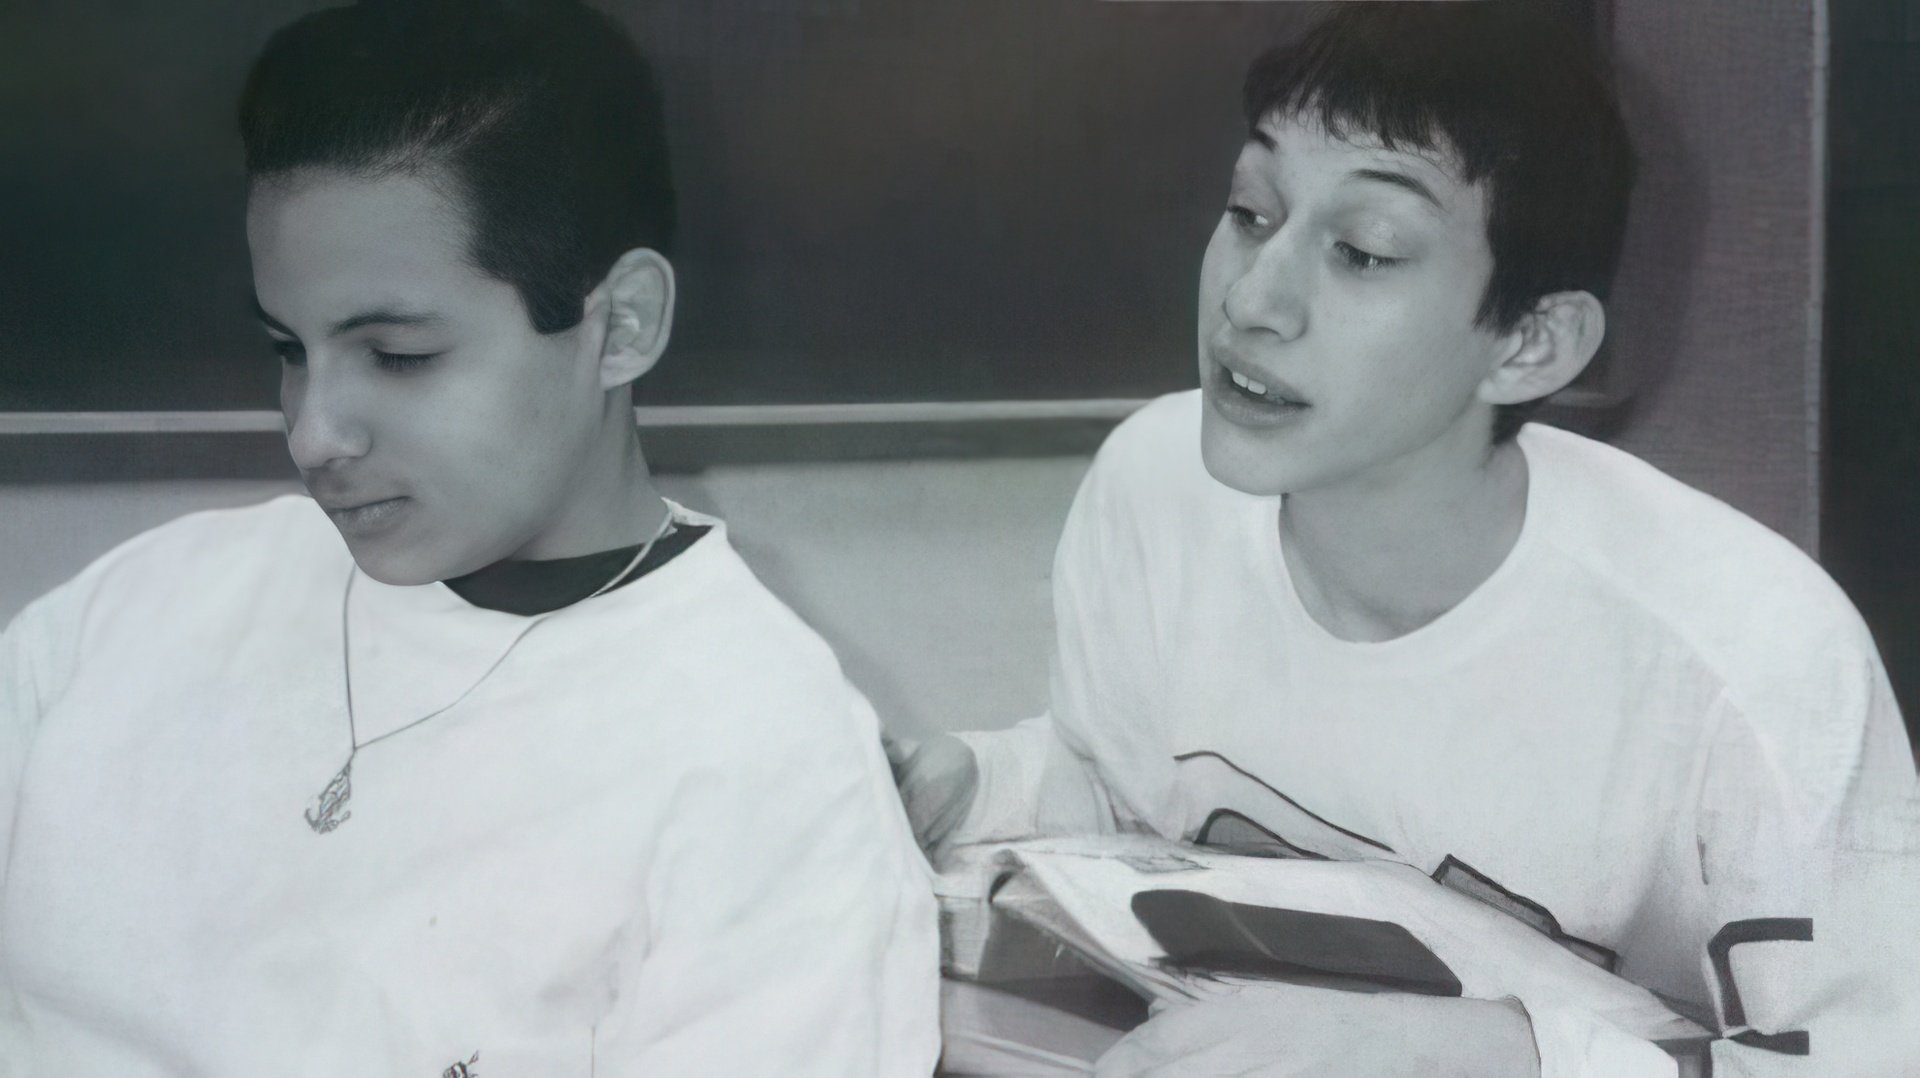 At school, Adam Driver (on the right) was an outcast